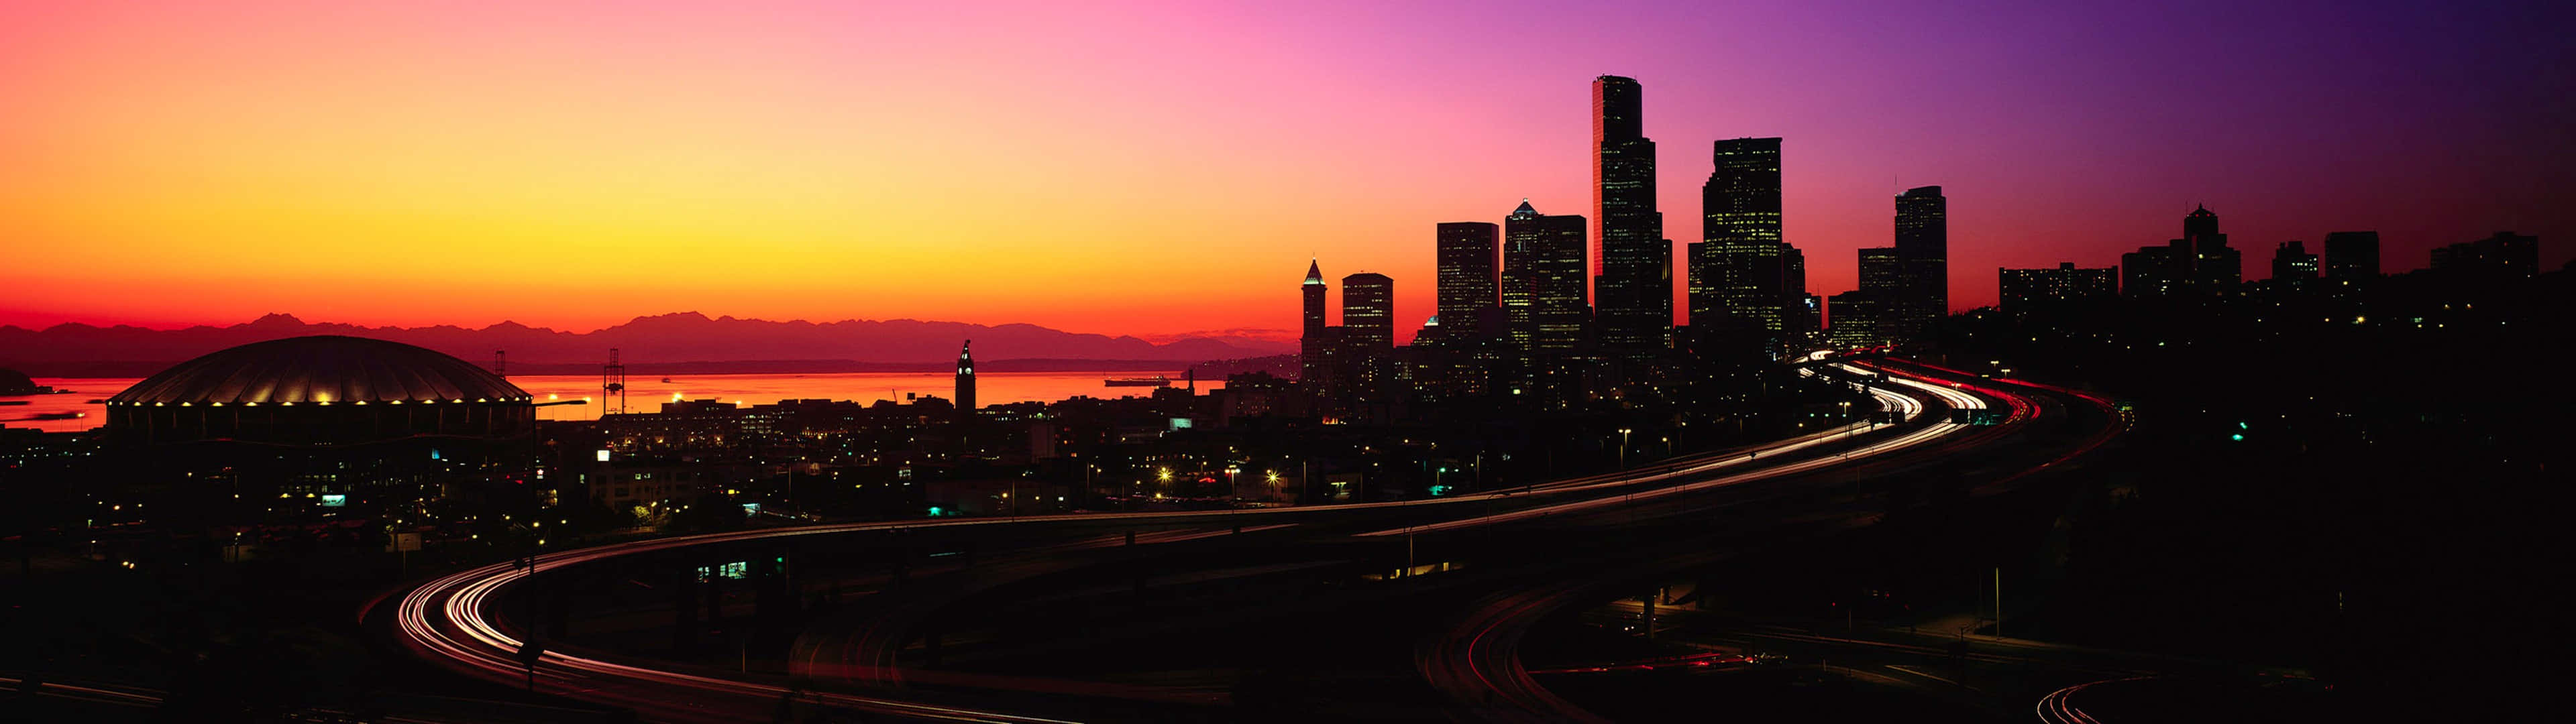 3840X1080 City Sunset Picture